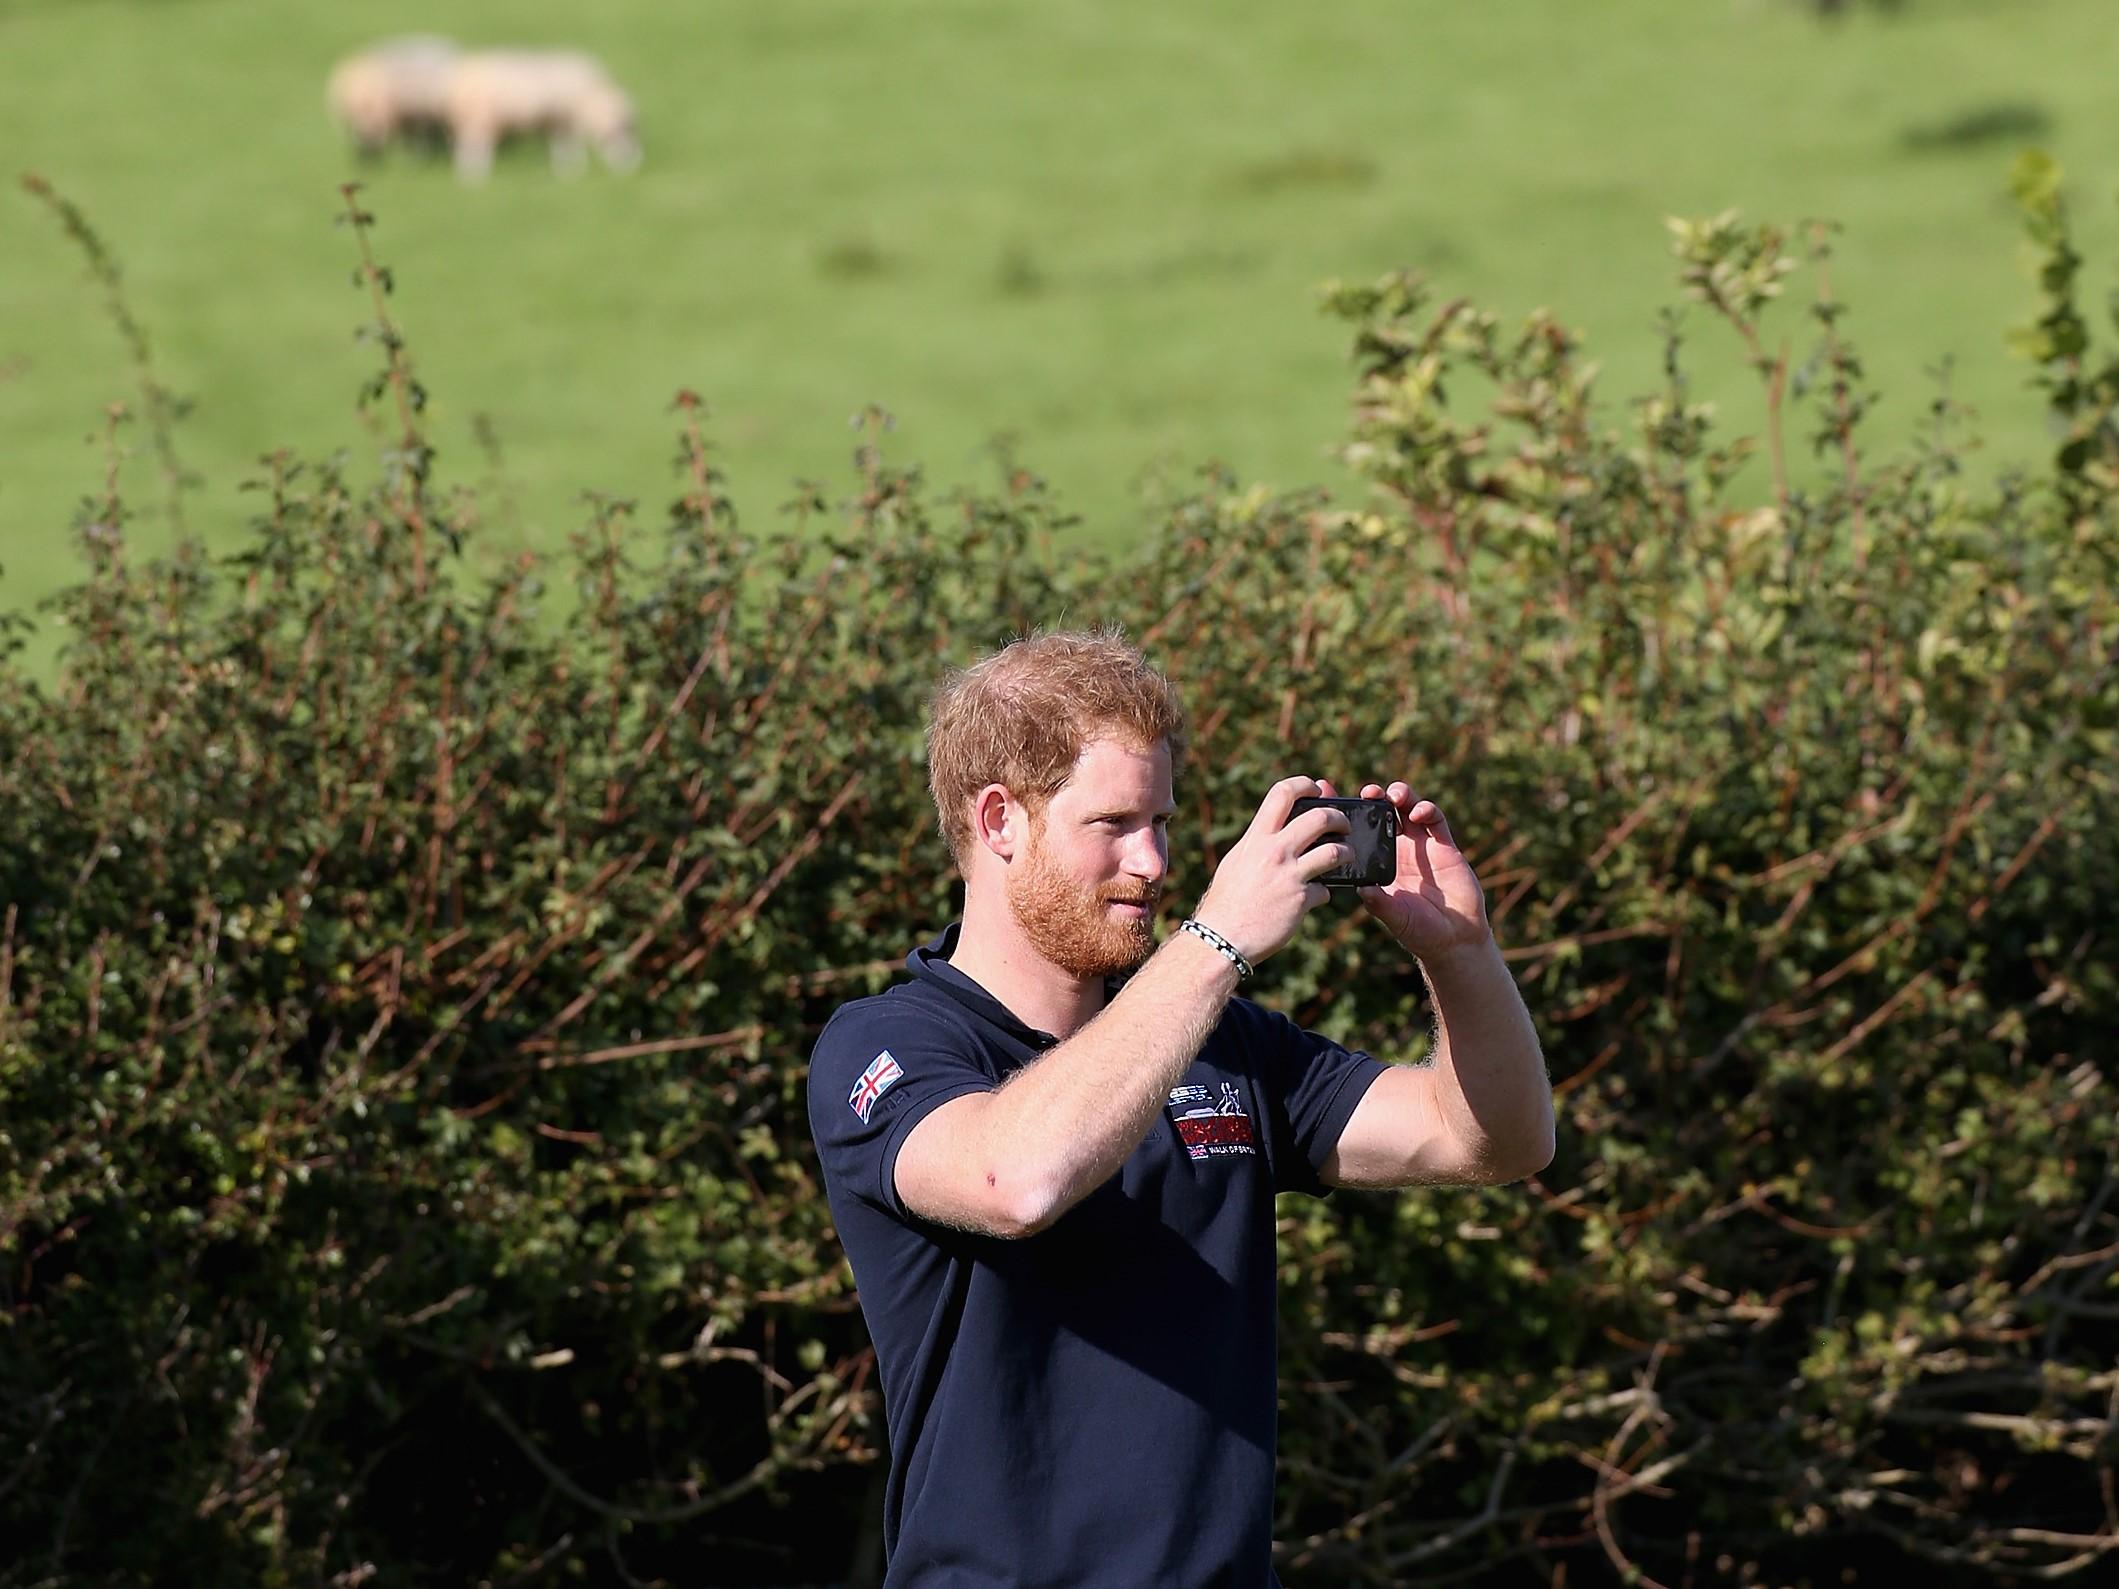 Prince Harry using a smartphone on 30 September, 2015 in Ludlow, England. The royal has warned about the addictive nature of some modern technologies